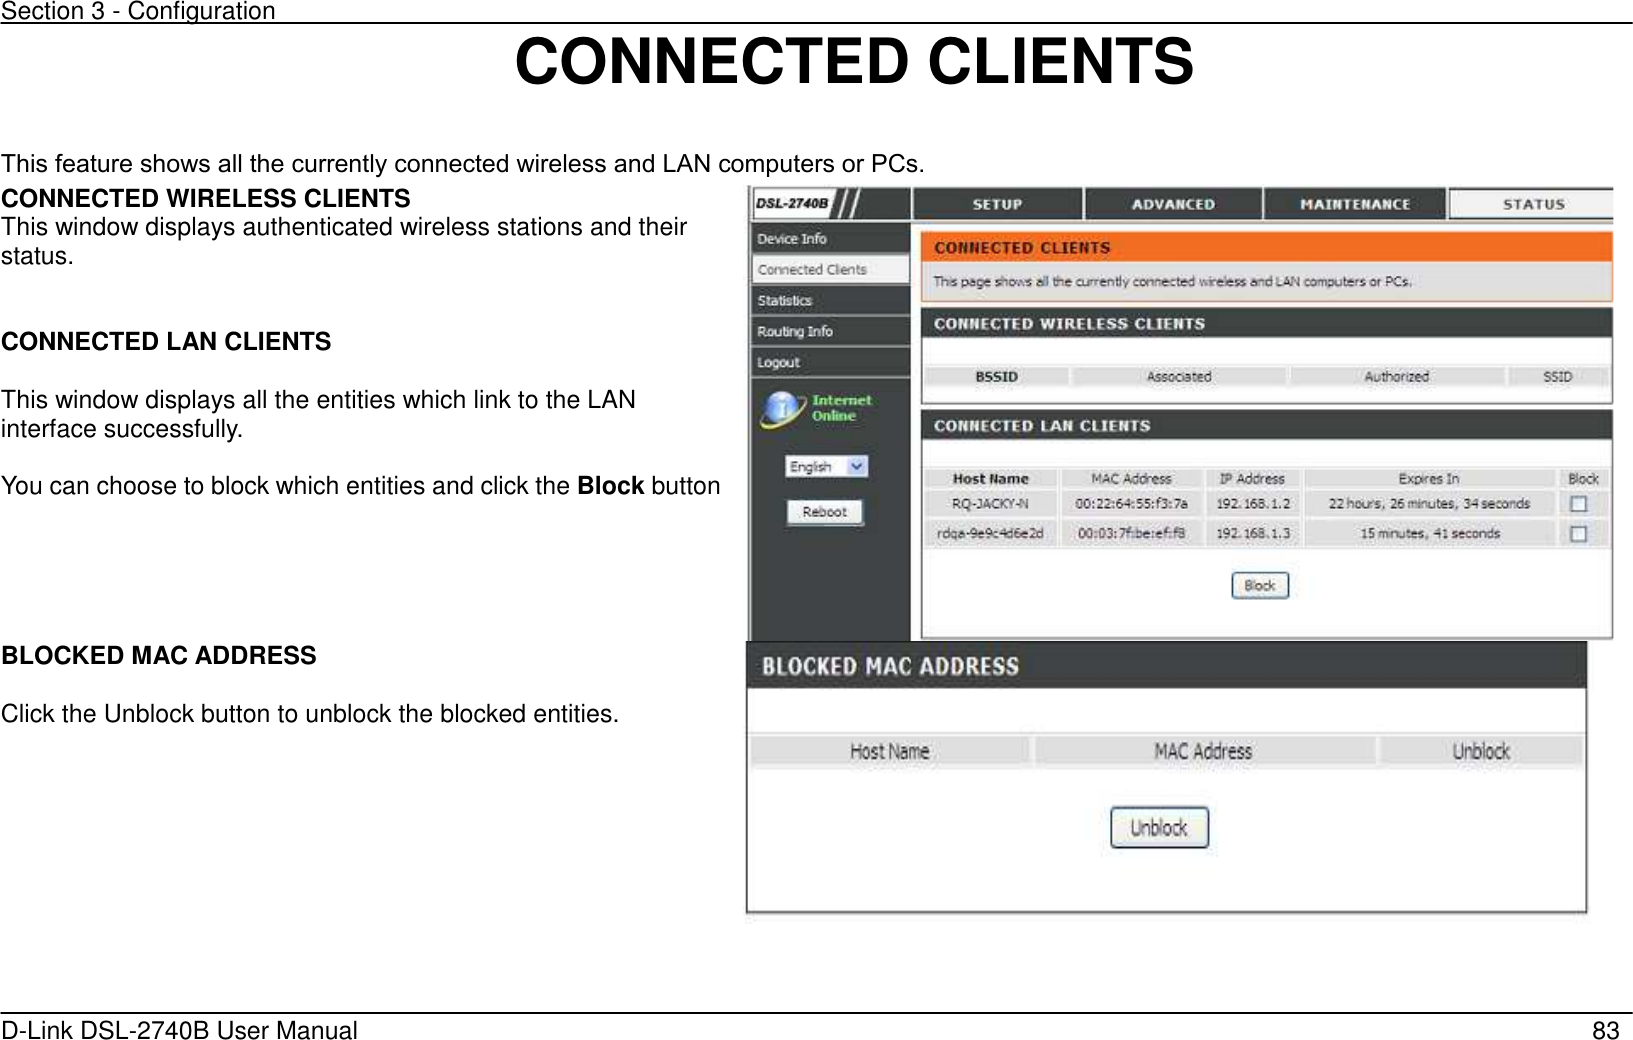 Section 3 - Configuration   D-Link DSL-2740B User Manual                                                  83 CONNECTED CLIENTS  This feature shows all the currently connected wireless and LAN computers or PCs. CONNECTED WIRELESS CLIENTS This window displays authenticated wireless stations and their status.   CONNECTED LAN CLIENTS  This window displays all the entities which link to the LAN interface successfully.  You can choose to block which entities and click the Block button BLOCKED MAC ADDRESS  Click the Unblock button to unblock the blocked entities.  